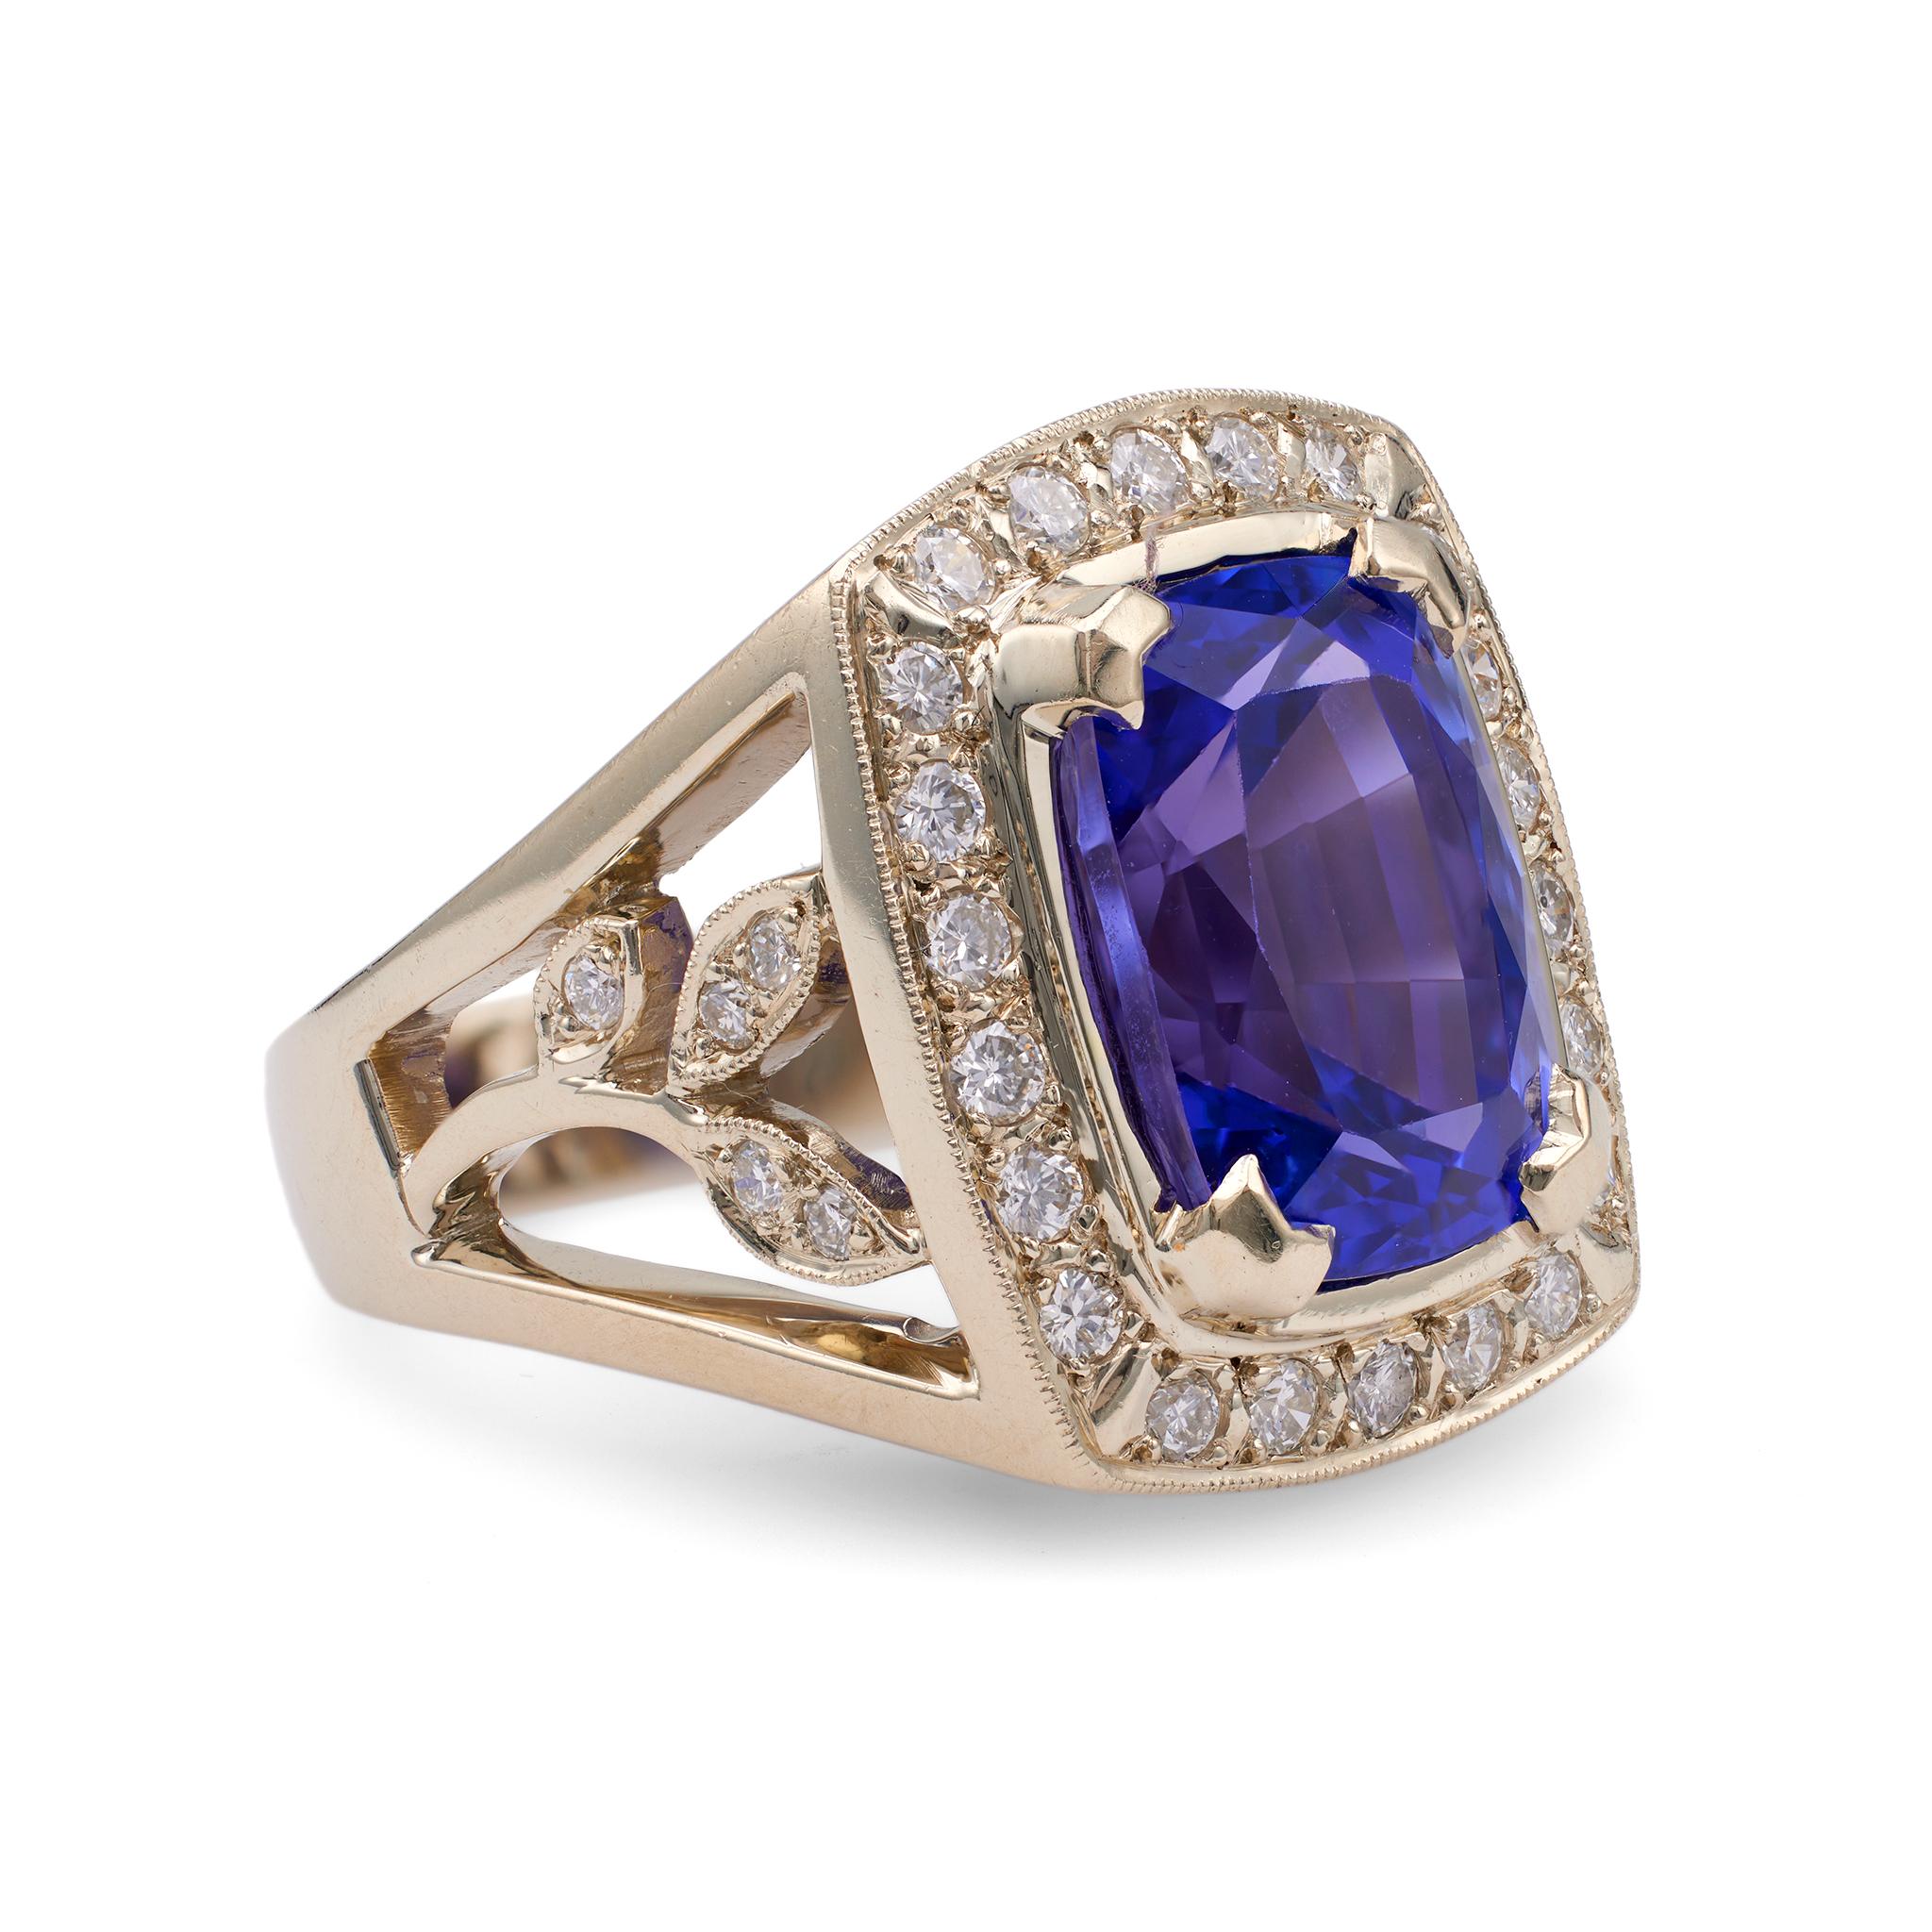 Vintage Tanzanite Diamond 14k White Gold Ring In Excellent Condition For Sale In Beverly Hills, CA